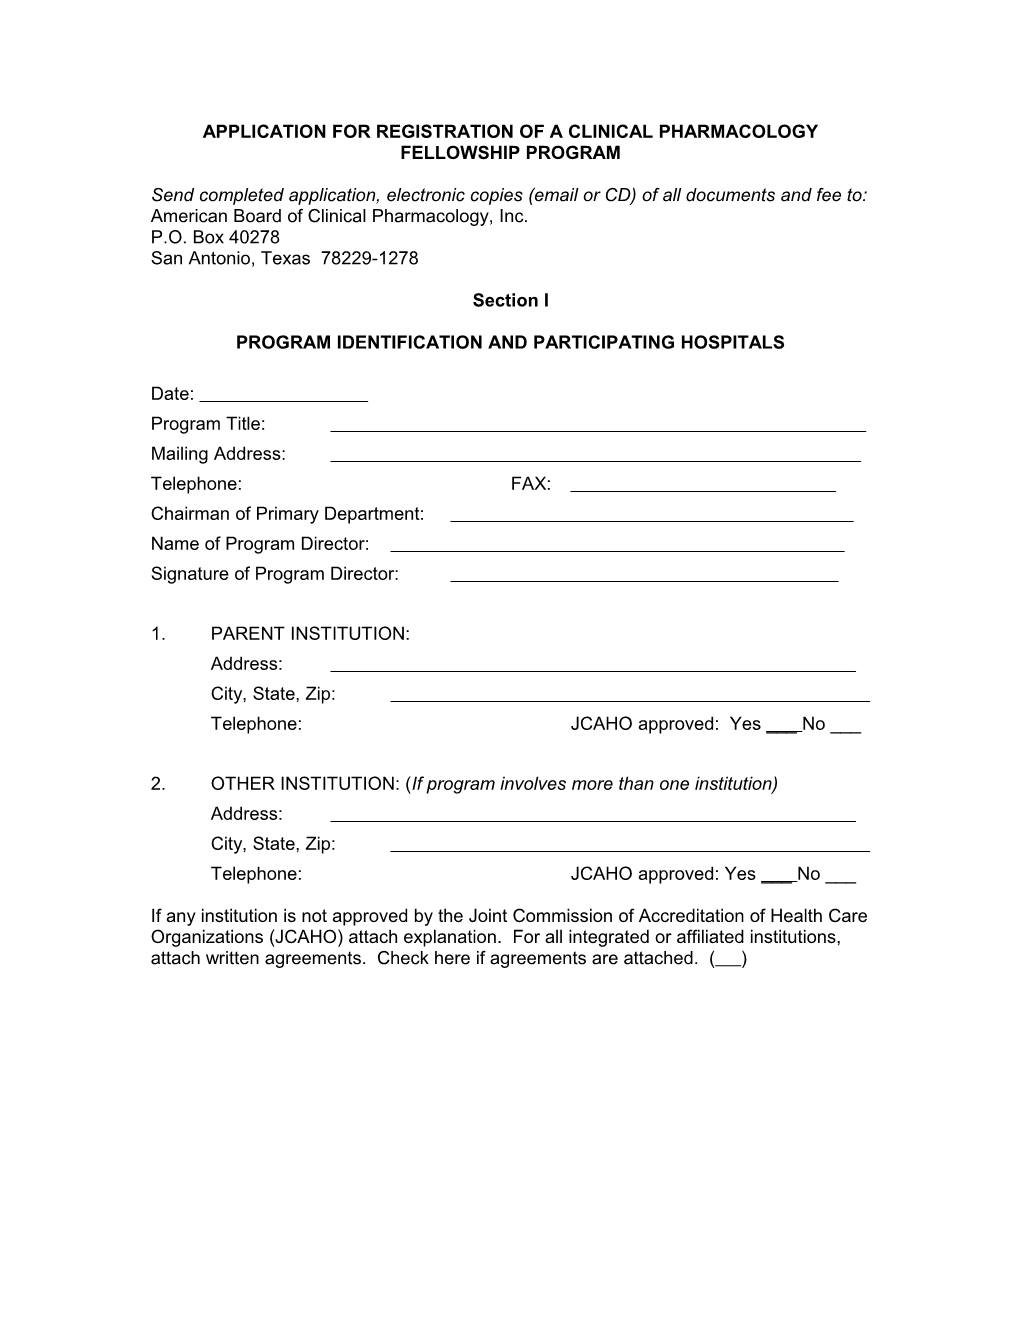 Application for Registration of a Clinical Pharmacology